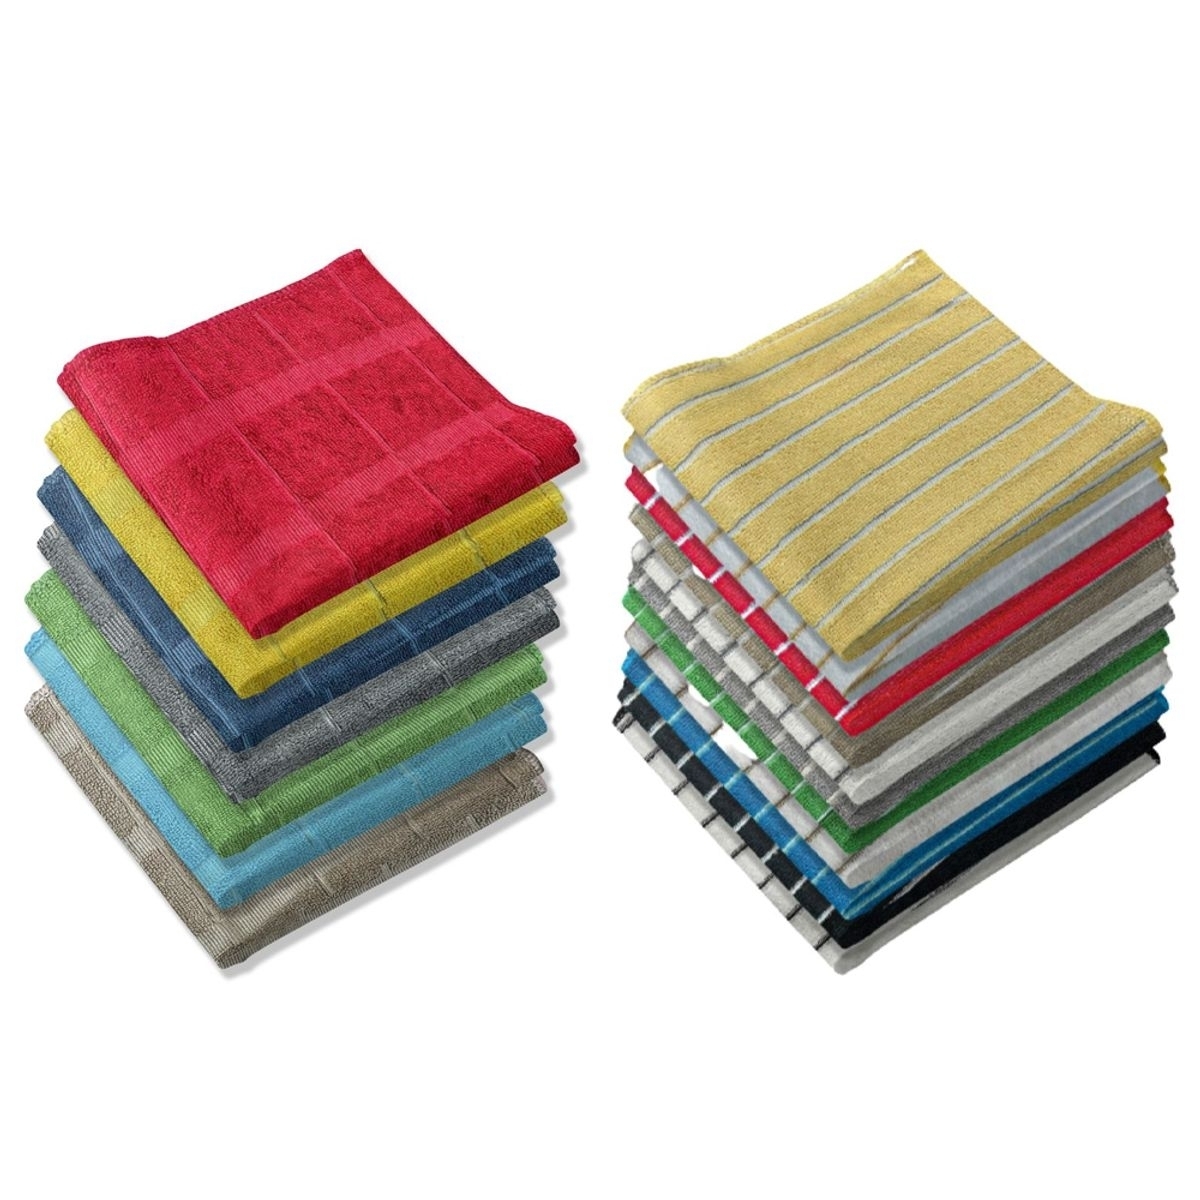 12/24-Pack: Ultra-Absorbent Multi Use Cleaning Super Soft Microfiber Dish Utility Rag Cloths - Waffle, 24-pack